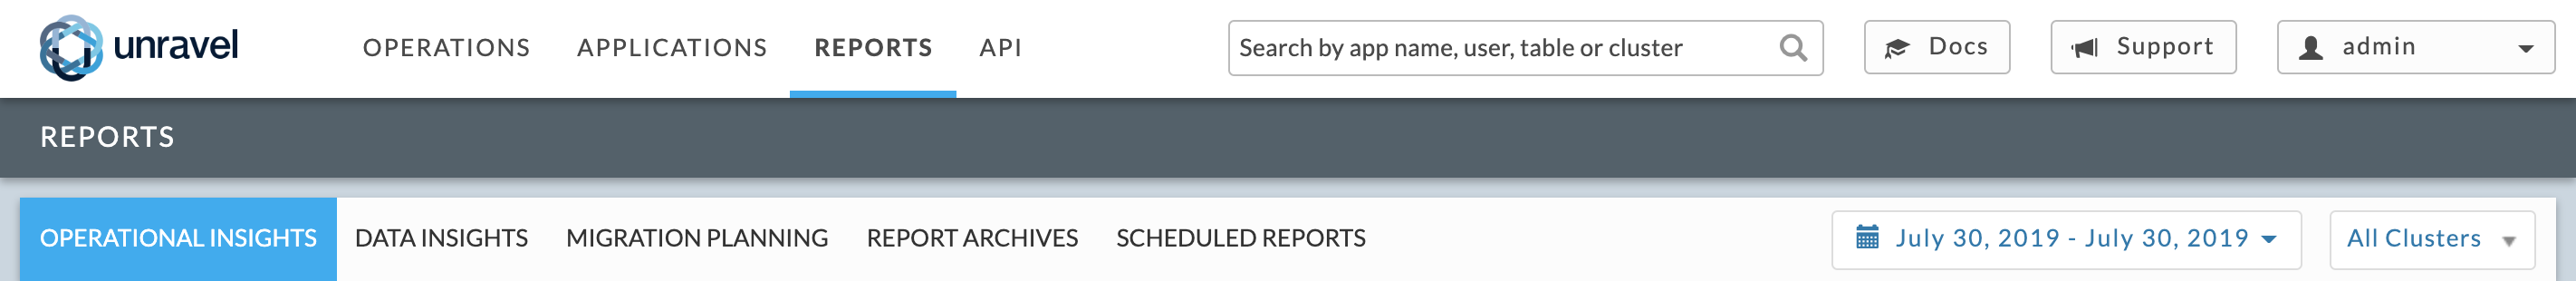 4.5.3.0 Reports Page Title bar.png